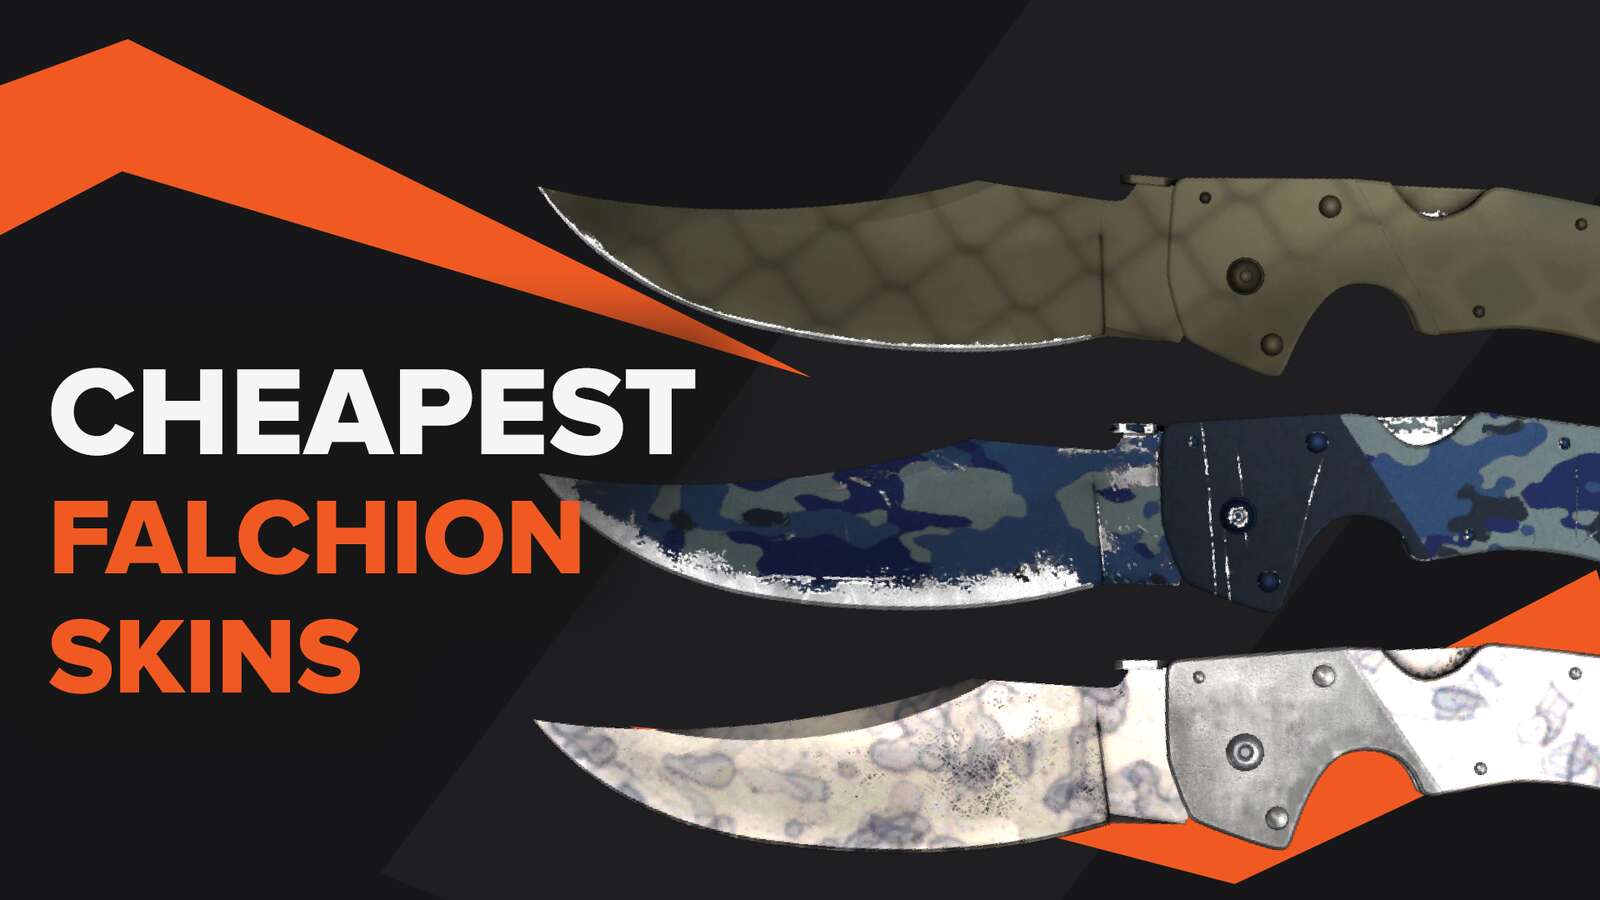 Cheapest Falchion Knife Skins in CSGO